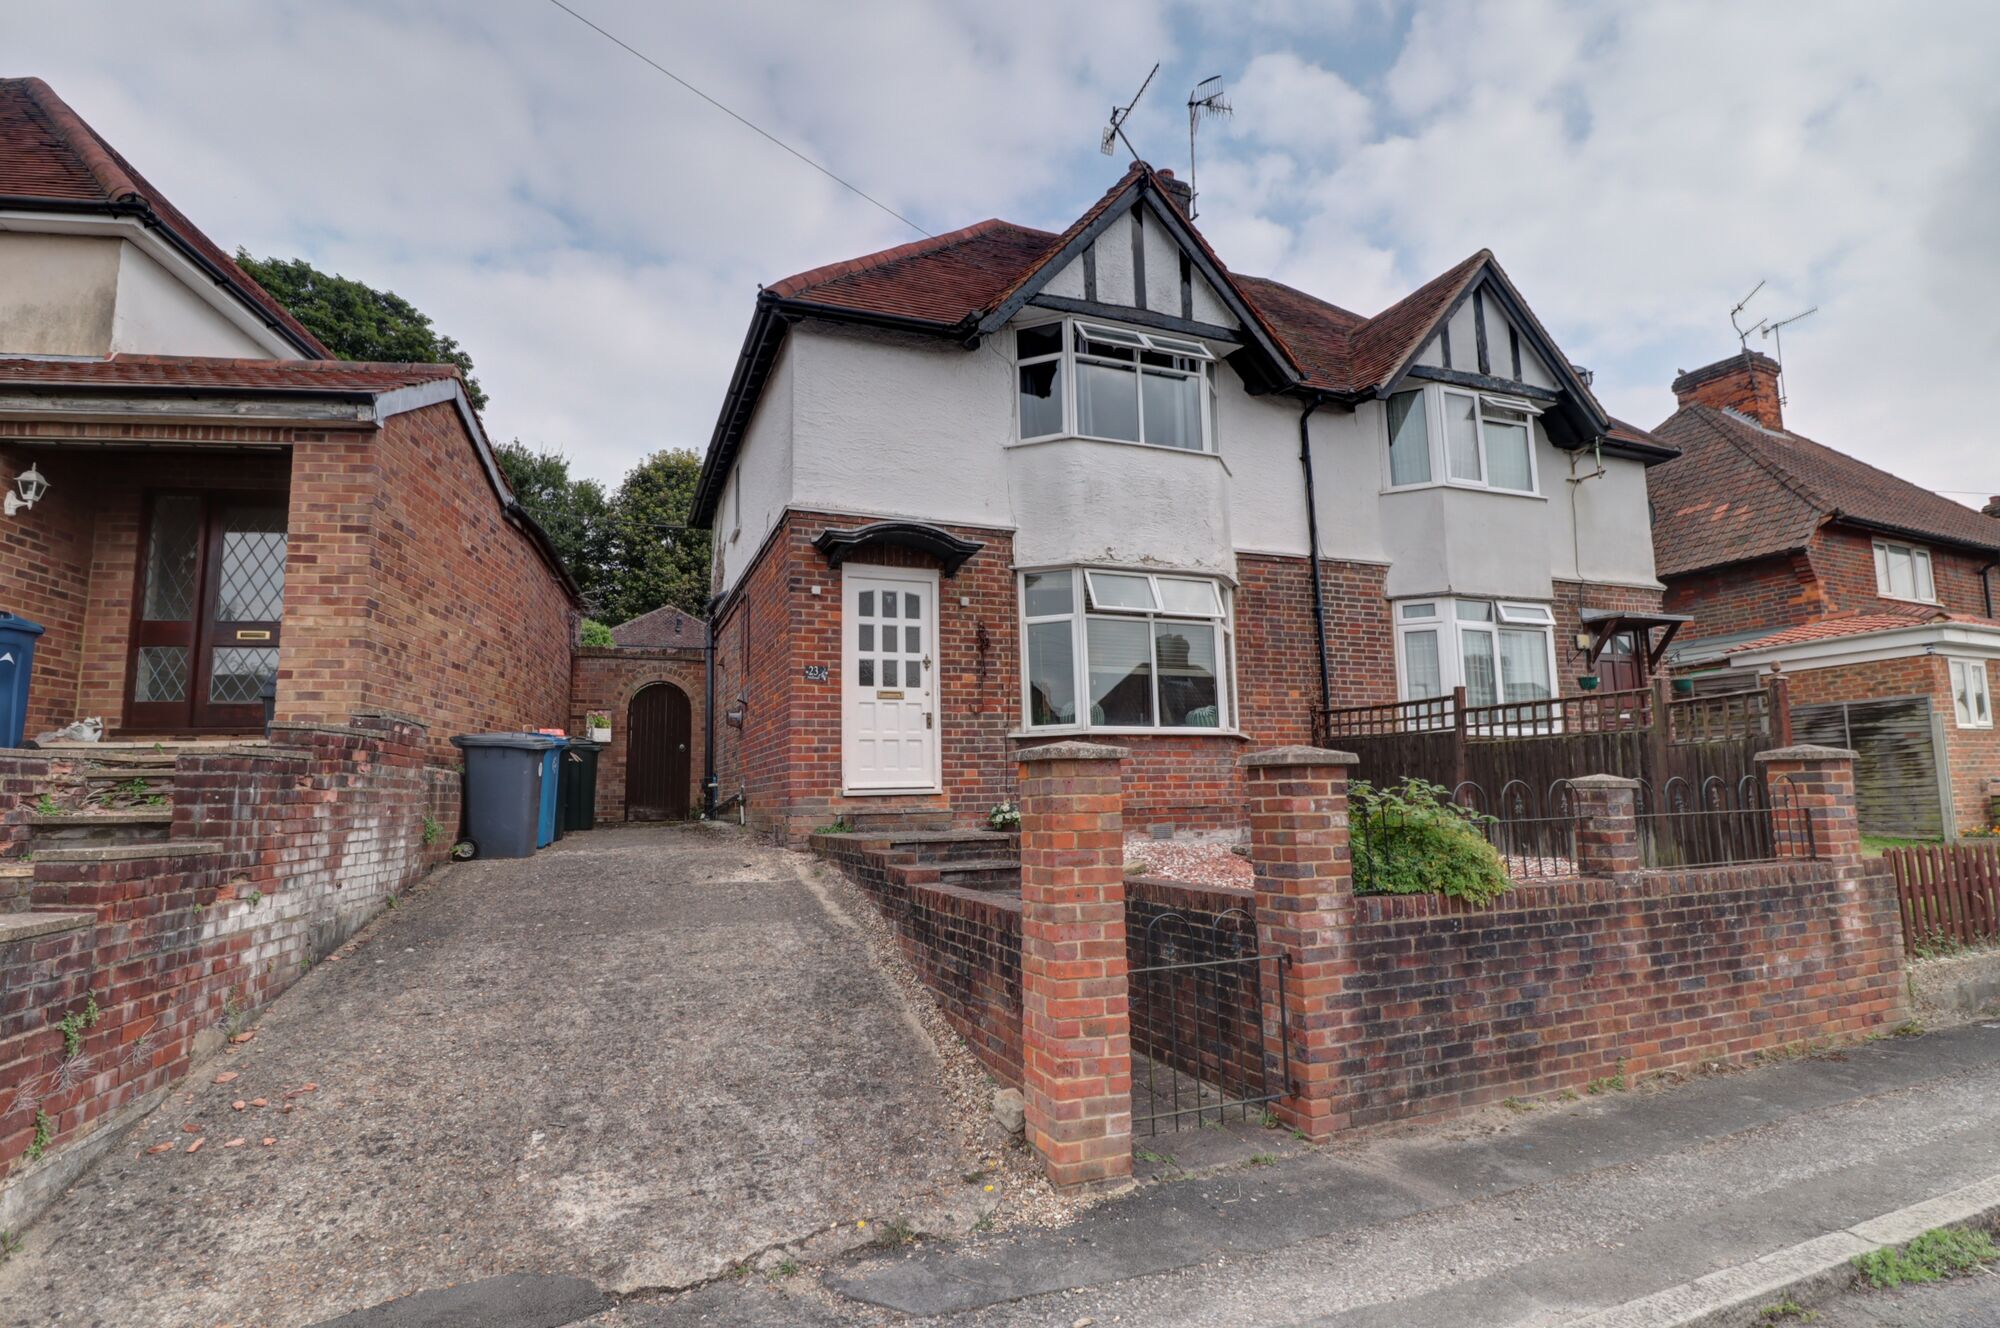 2 bedroom semi detached house to rent, Available now Hillside, High Wycombe, HP13, main image